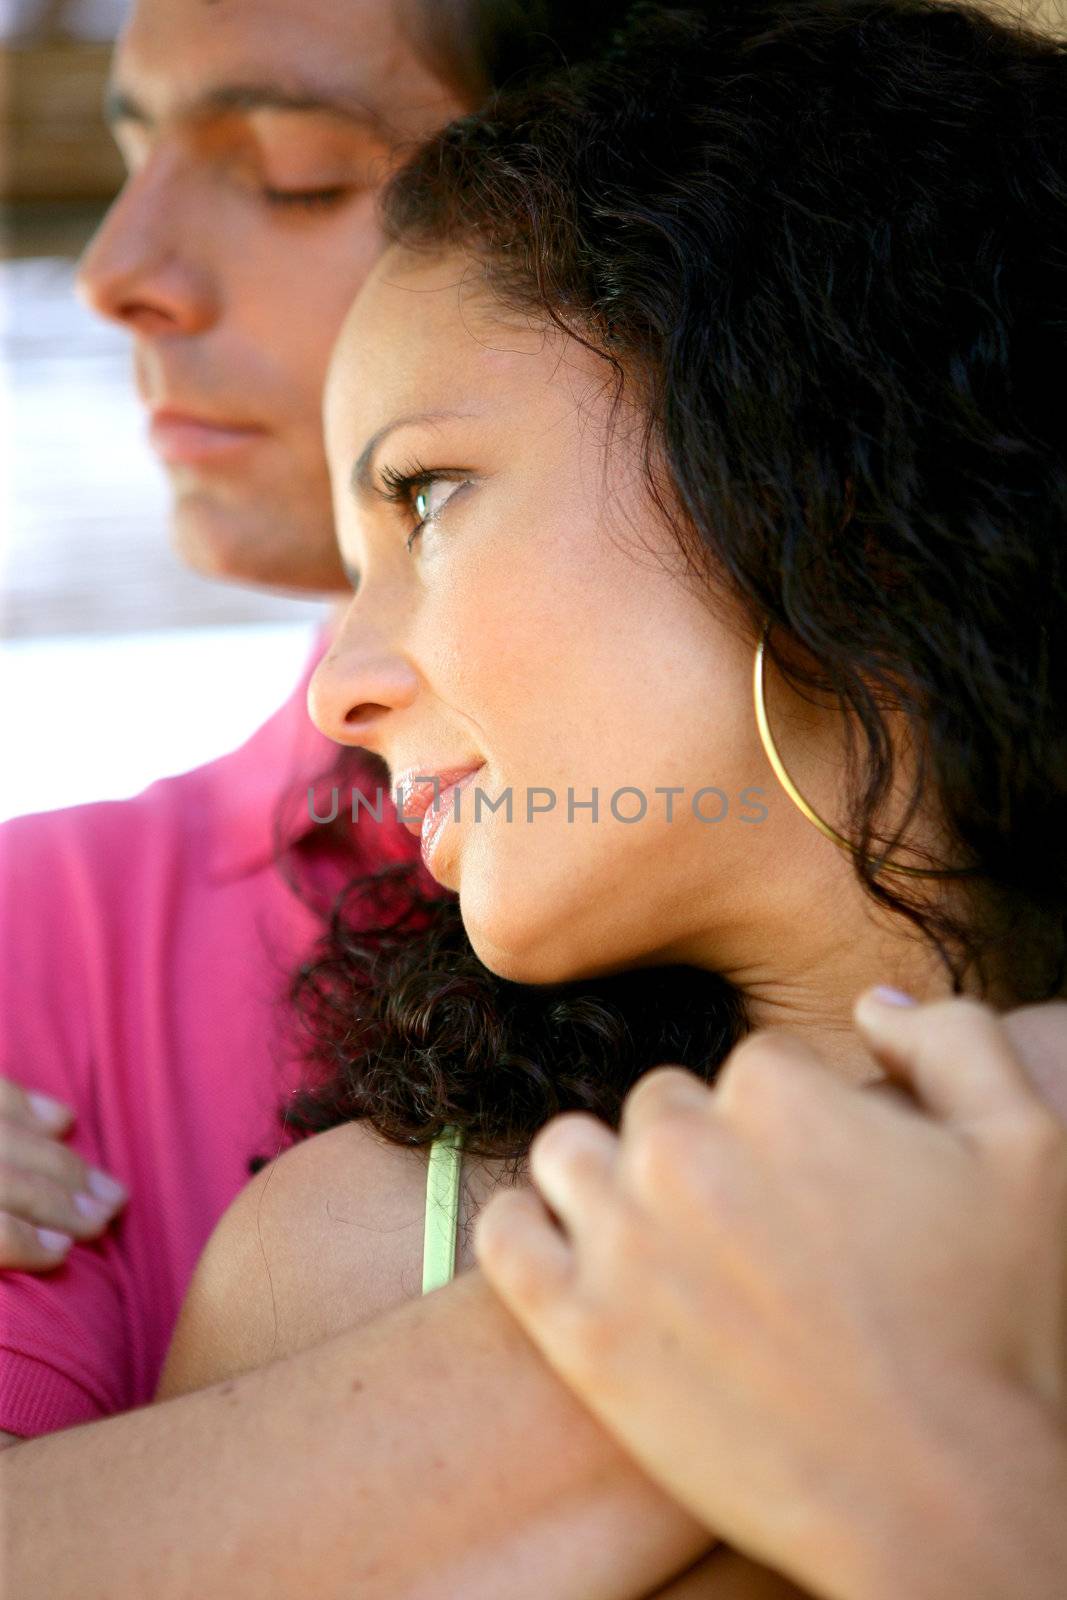 Young couple in a restful embrace by phovoir